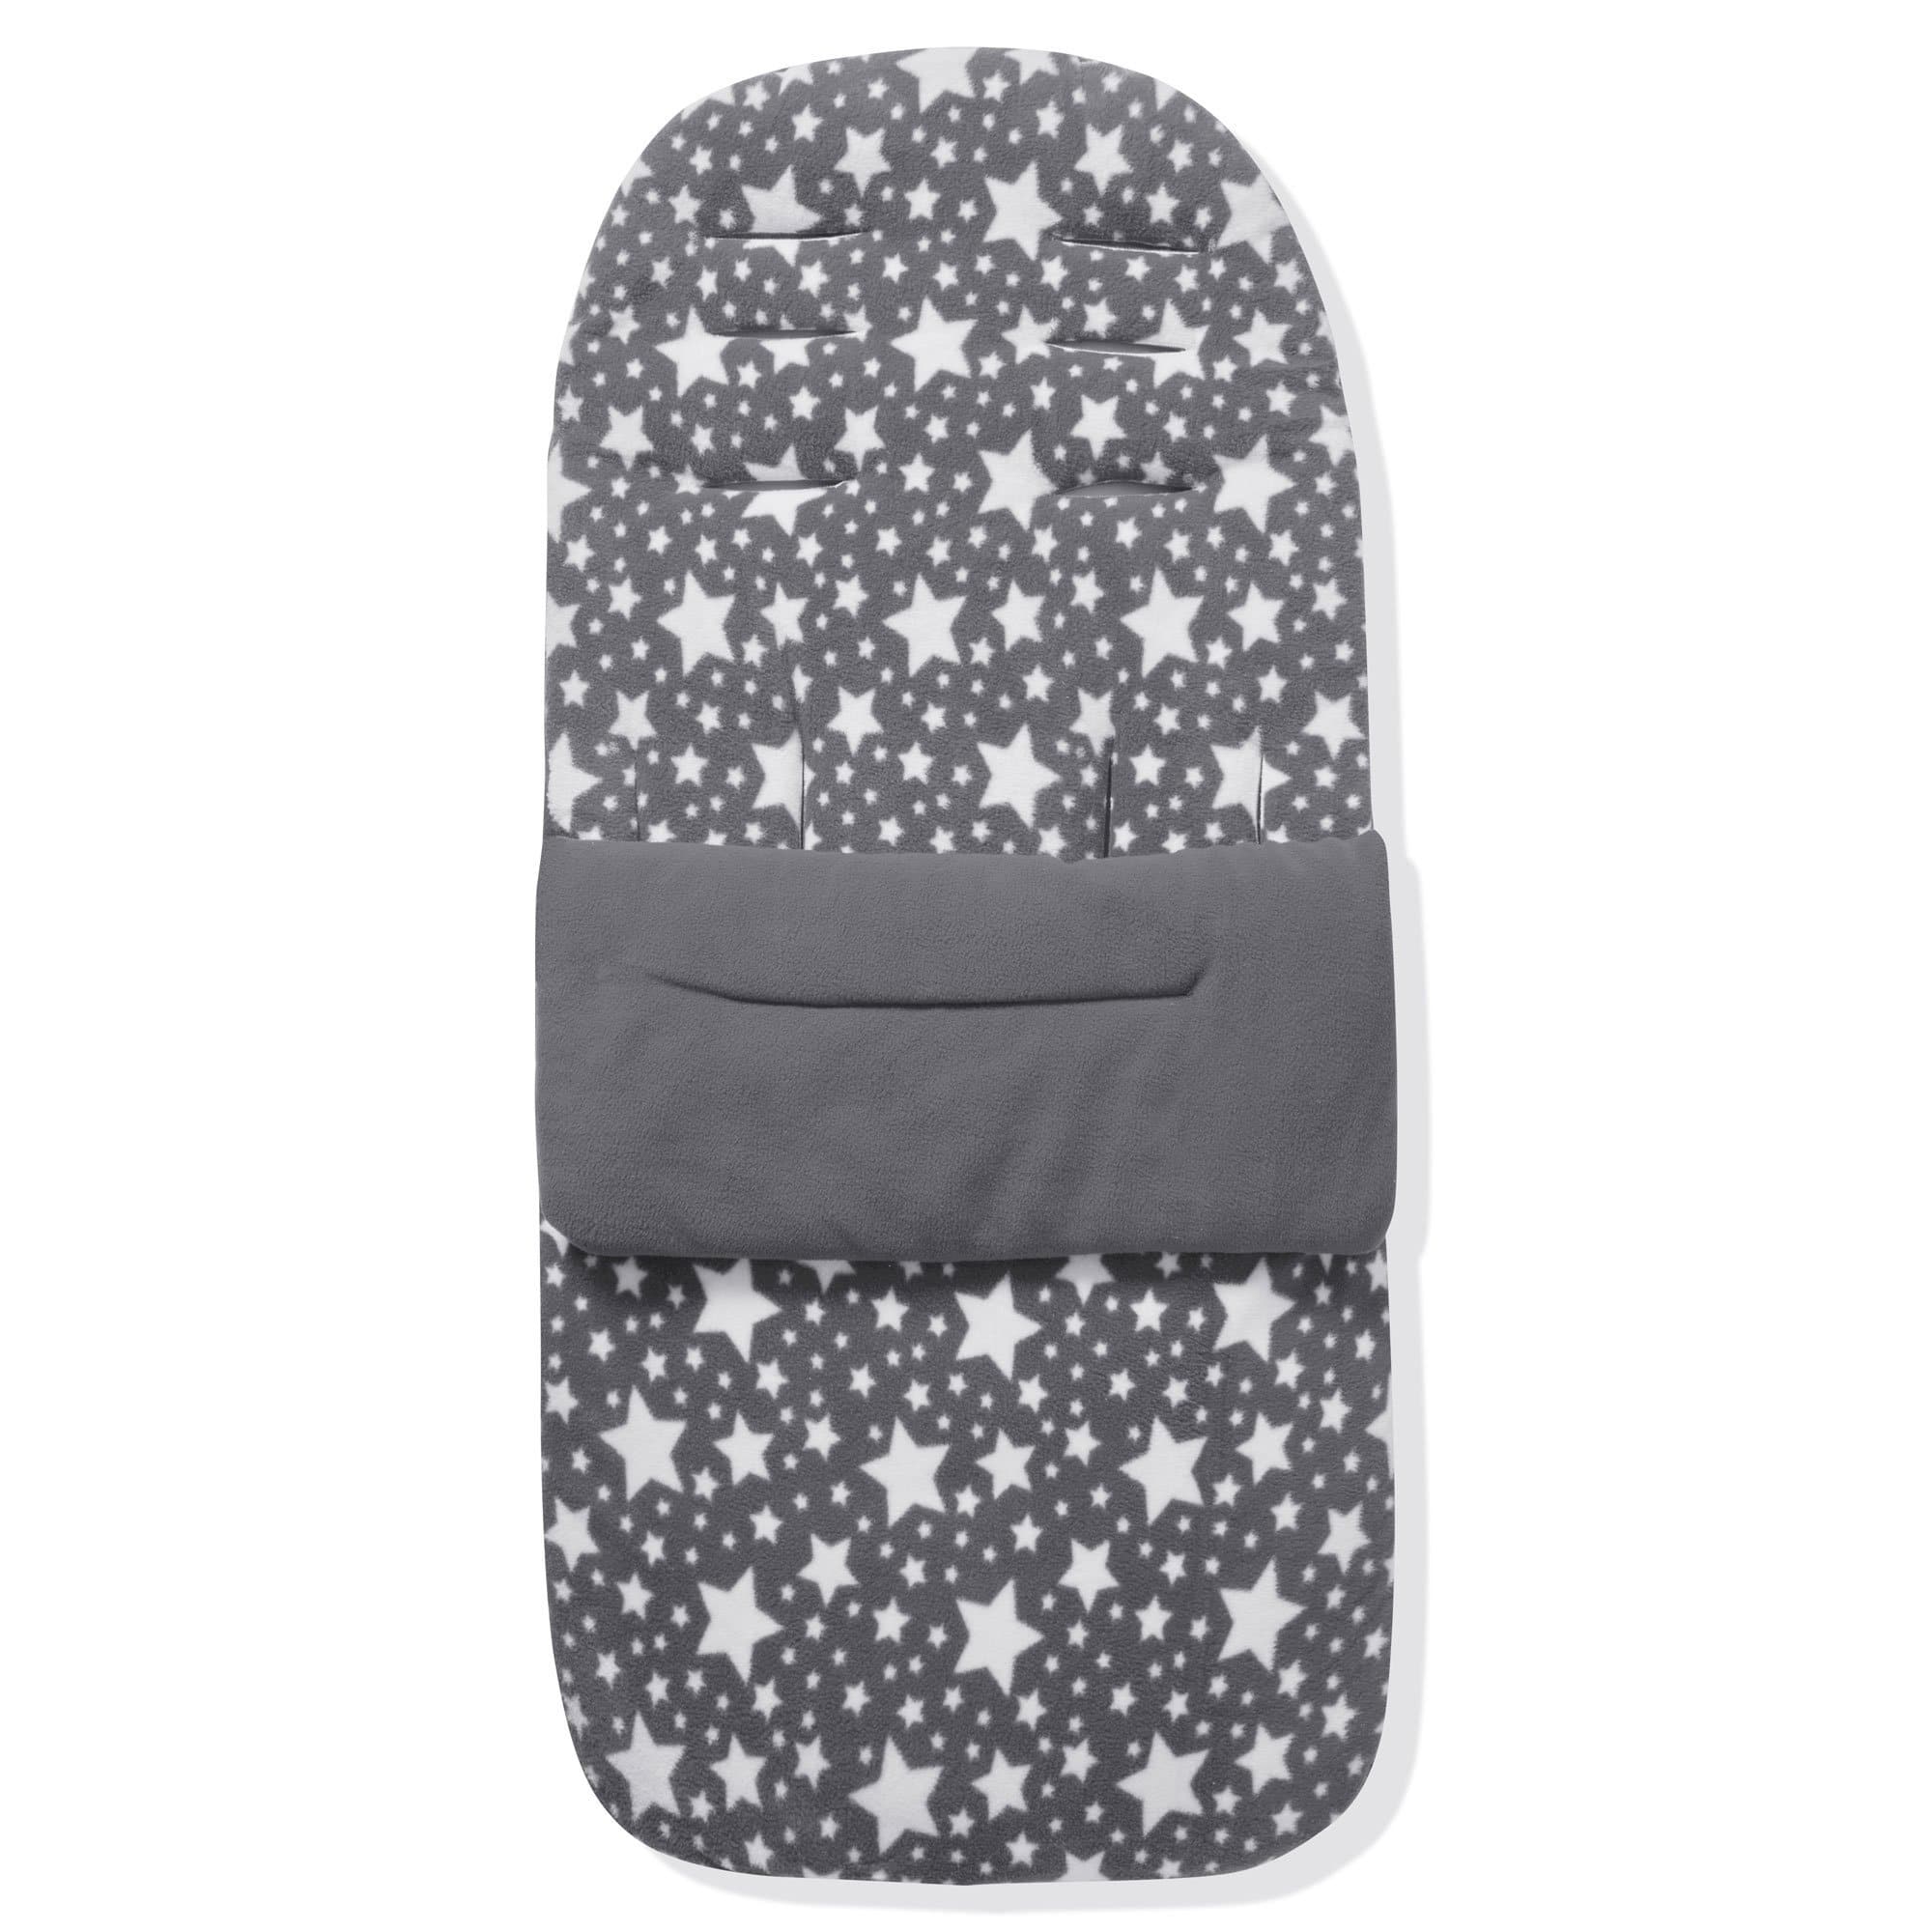 Fleece Footmuff / Cosy Toes Compatible with Hybrid - Grey Star / Fits All Models | For Your Little One